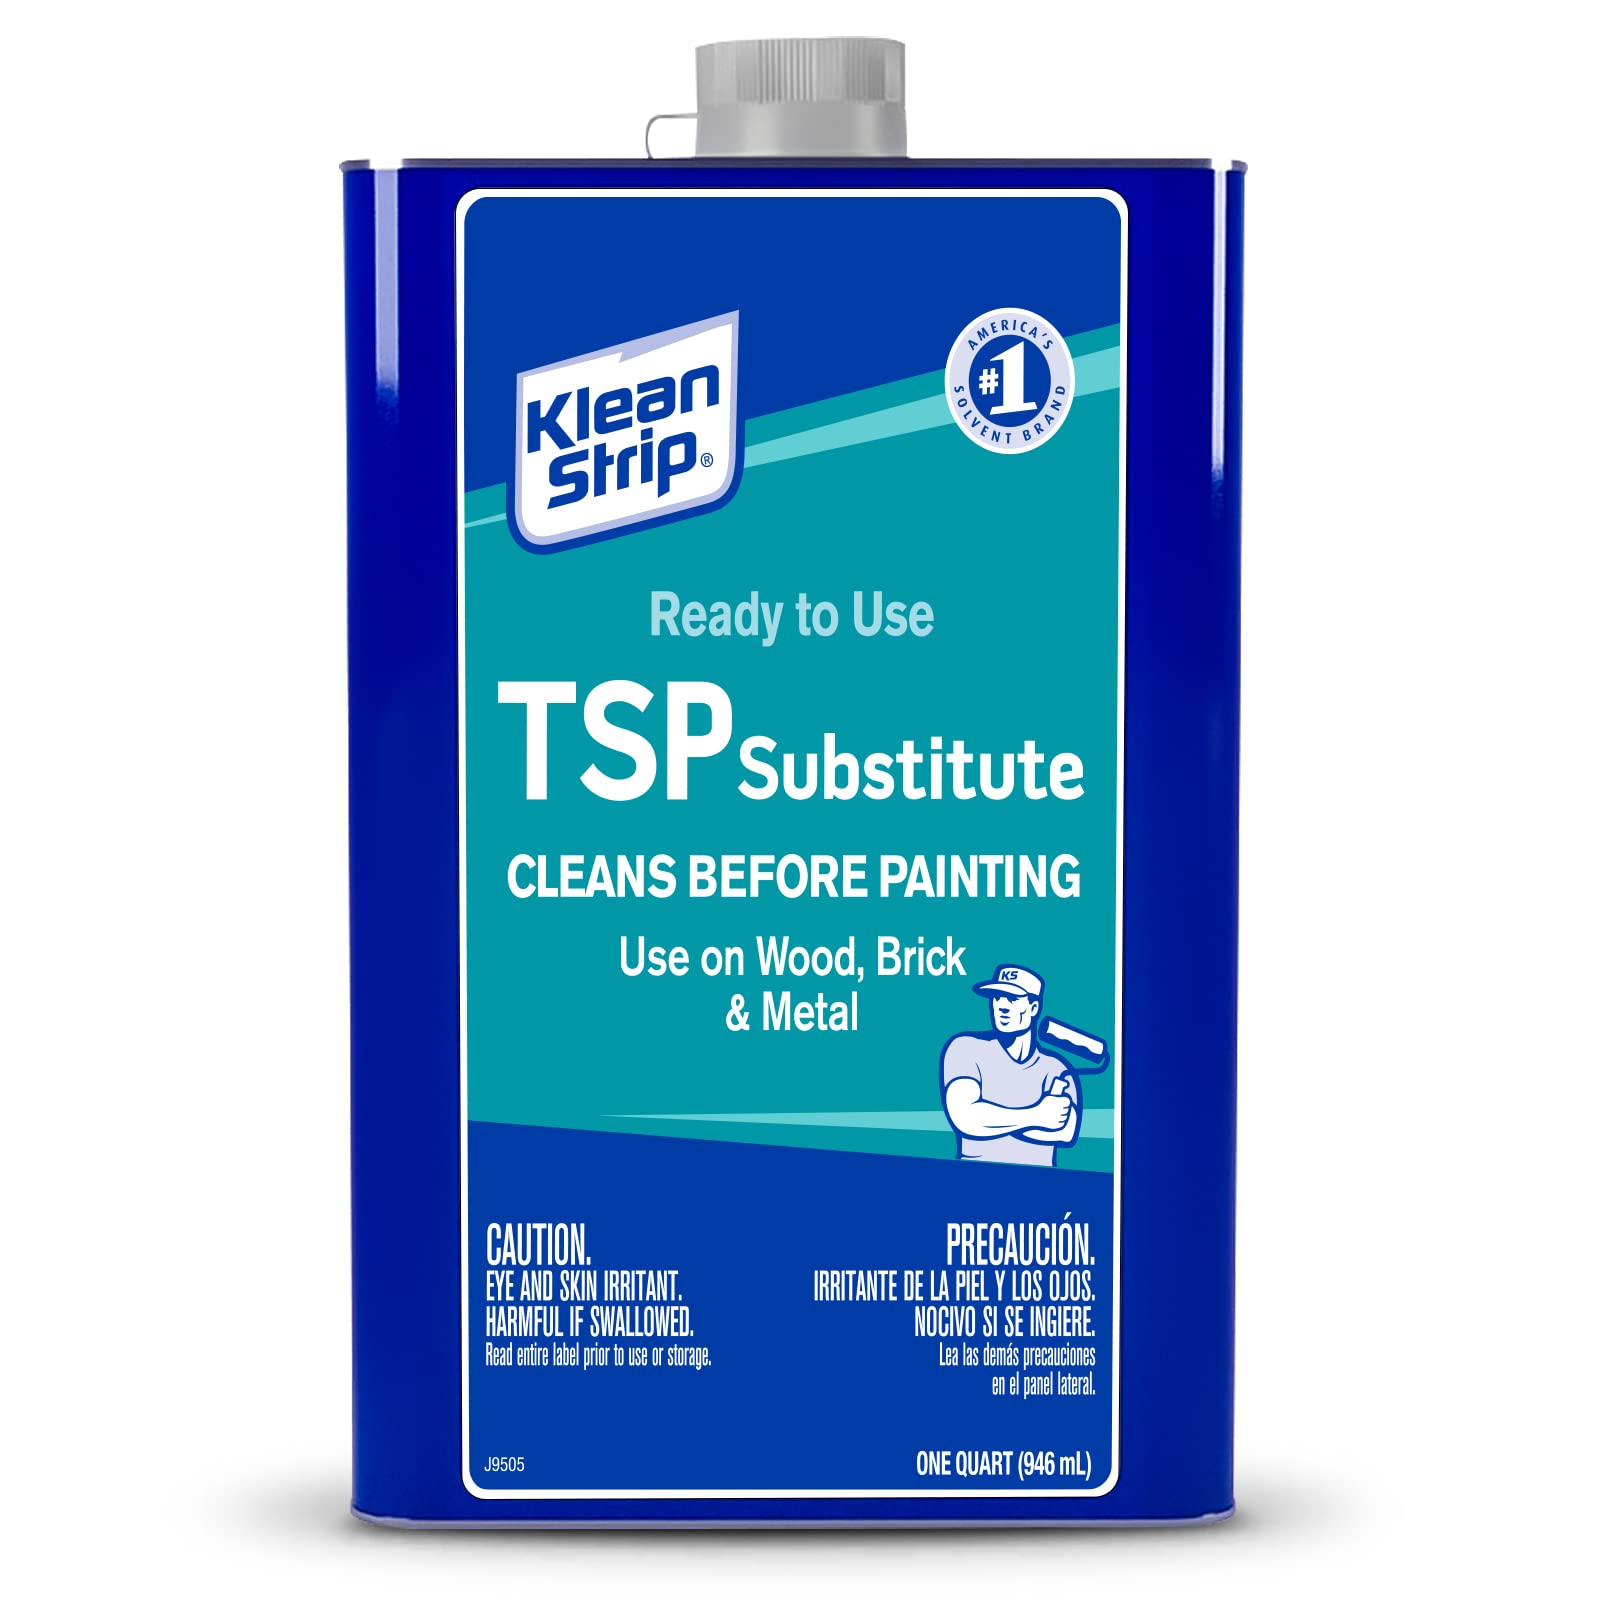 Klean Strip Liquid TSP Substitute- Degreaser Cleaner Heavy Duty - Surface Prep Tool - Paint Cleaner - Deglosser for Kitchen Cabinets - Available with Premium Quality Centaurus AZ PUTTY KNIFE- 1QT